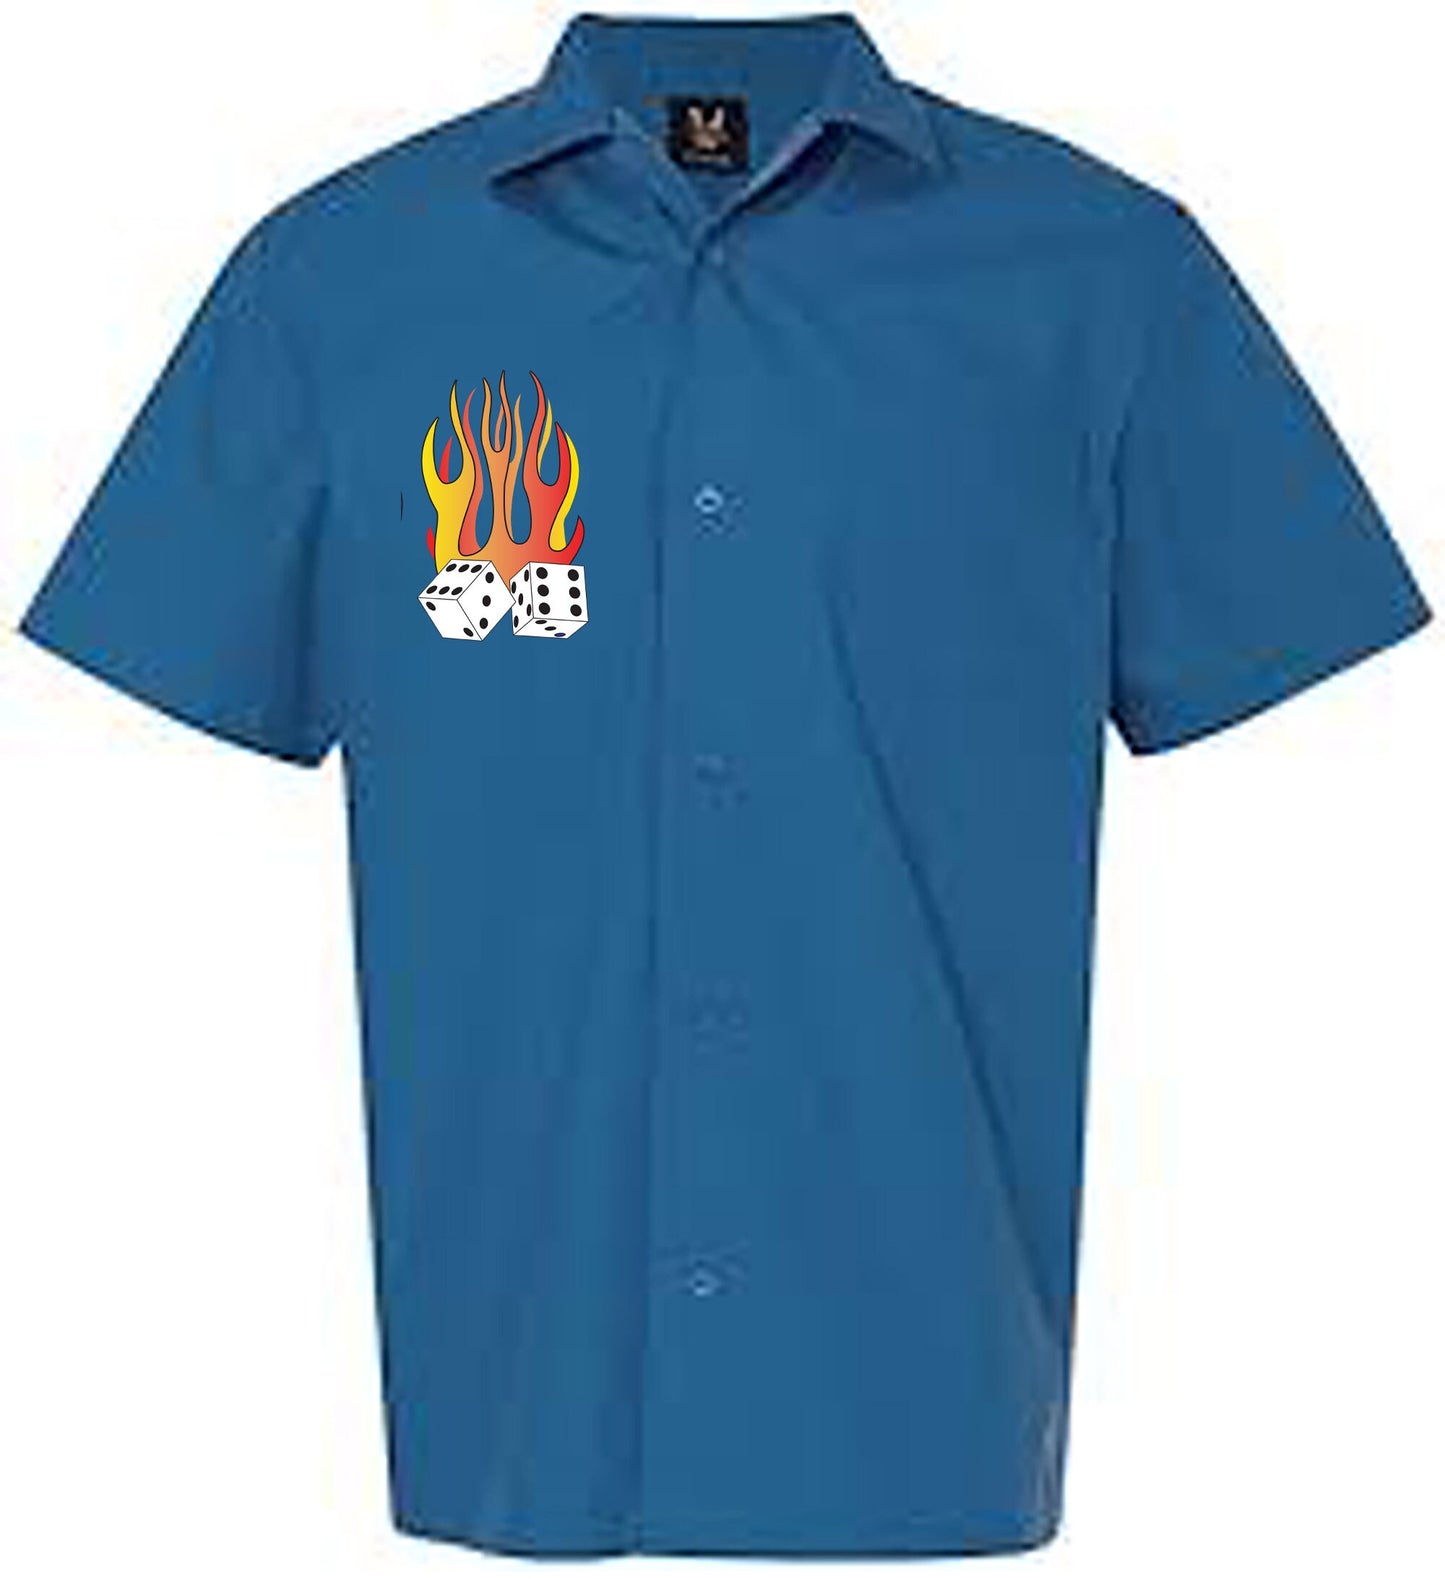 Flaming Dice Classic Retro Bowling Shirt- Vintage Bowler ( Closeout) in multiple colors  - Includes Embroidered Name #235